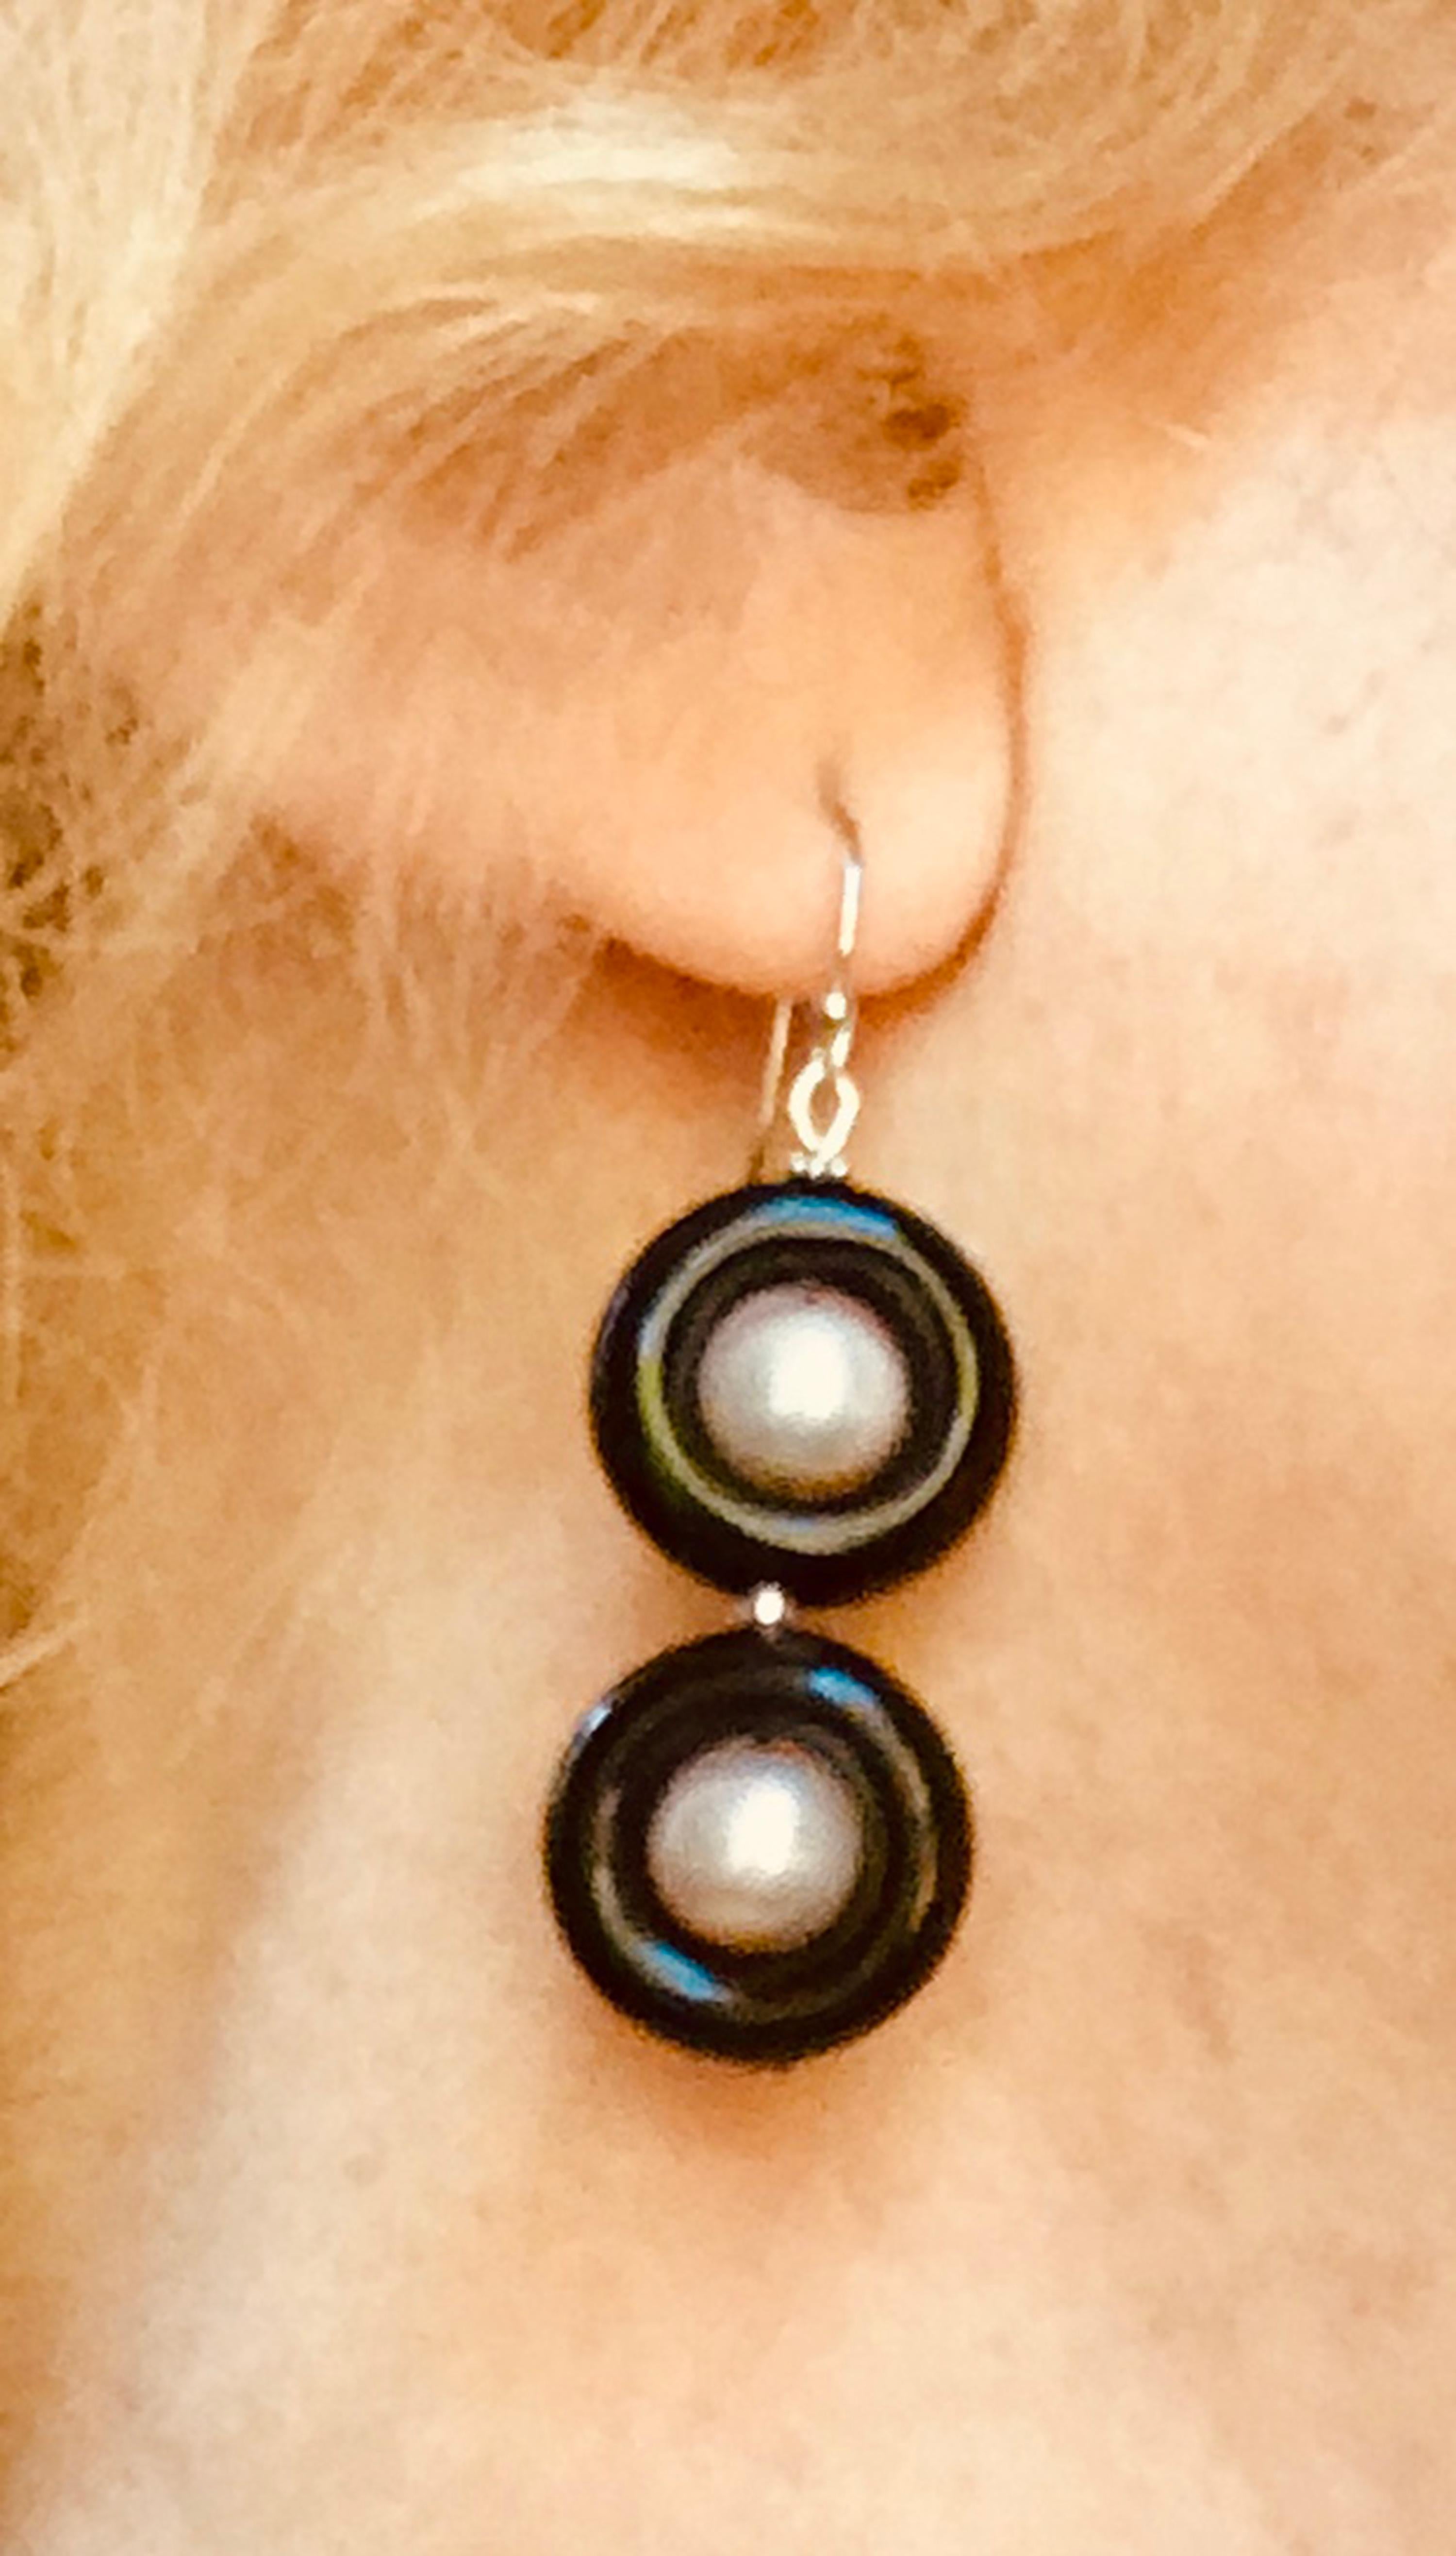 Artist Marina J. Double Onyx and Pearl Earrings with 14 Karat White Gold Hook and Beads For Sale